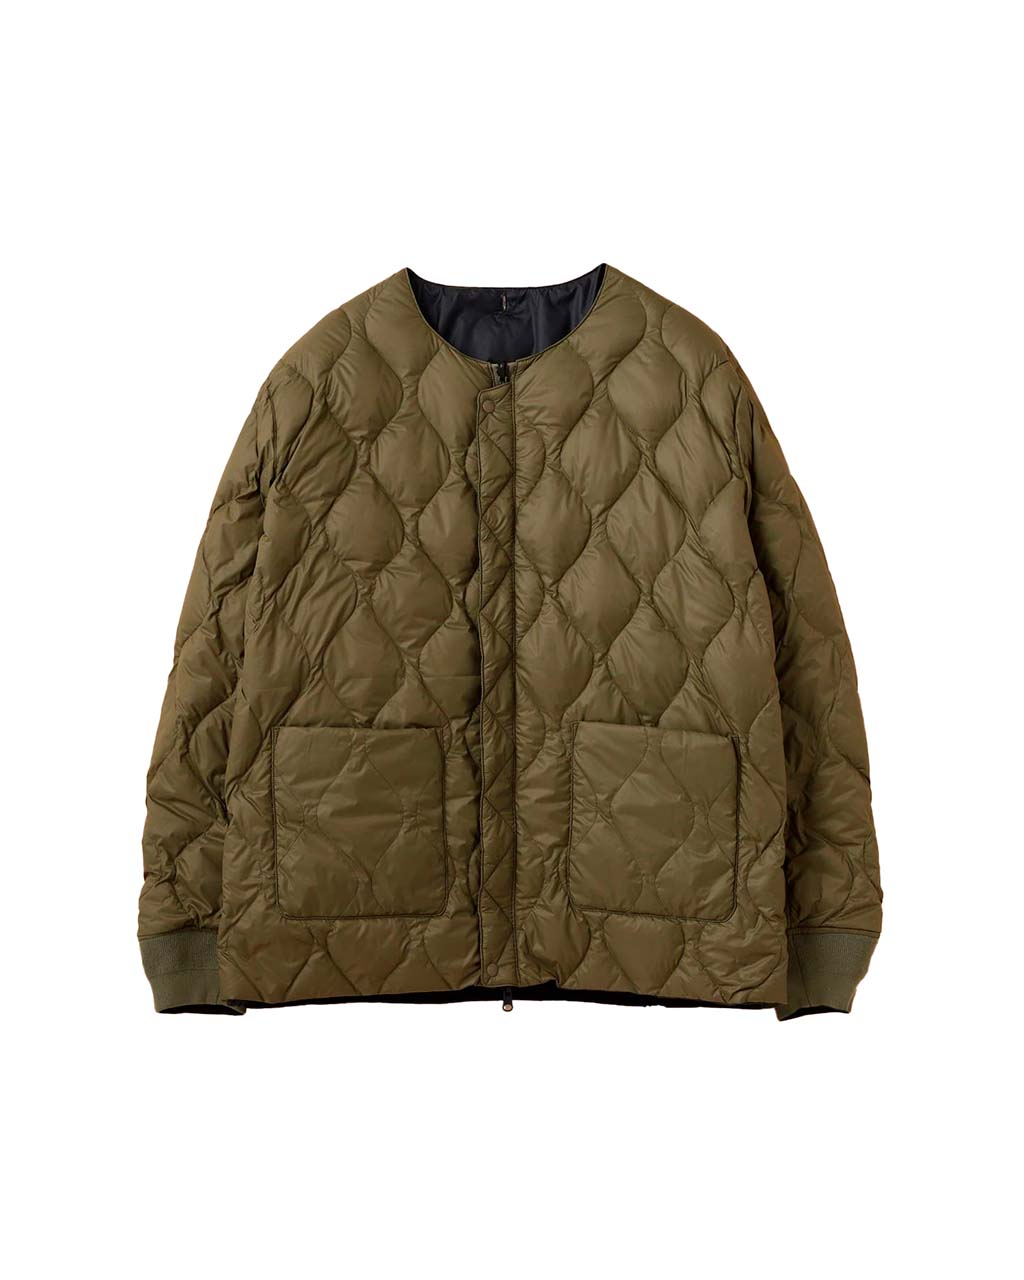 Taion x Beams Reversible MA-1 Type Inner Jacket